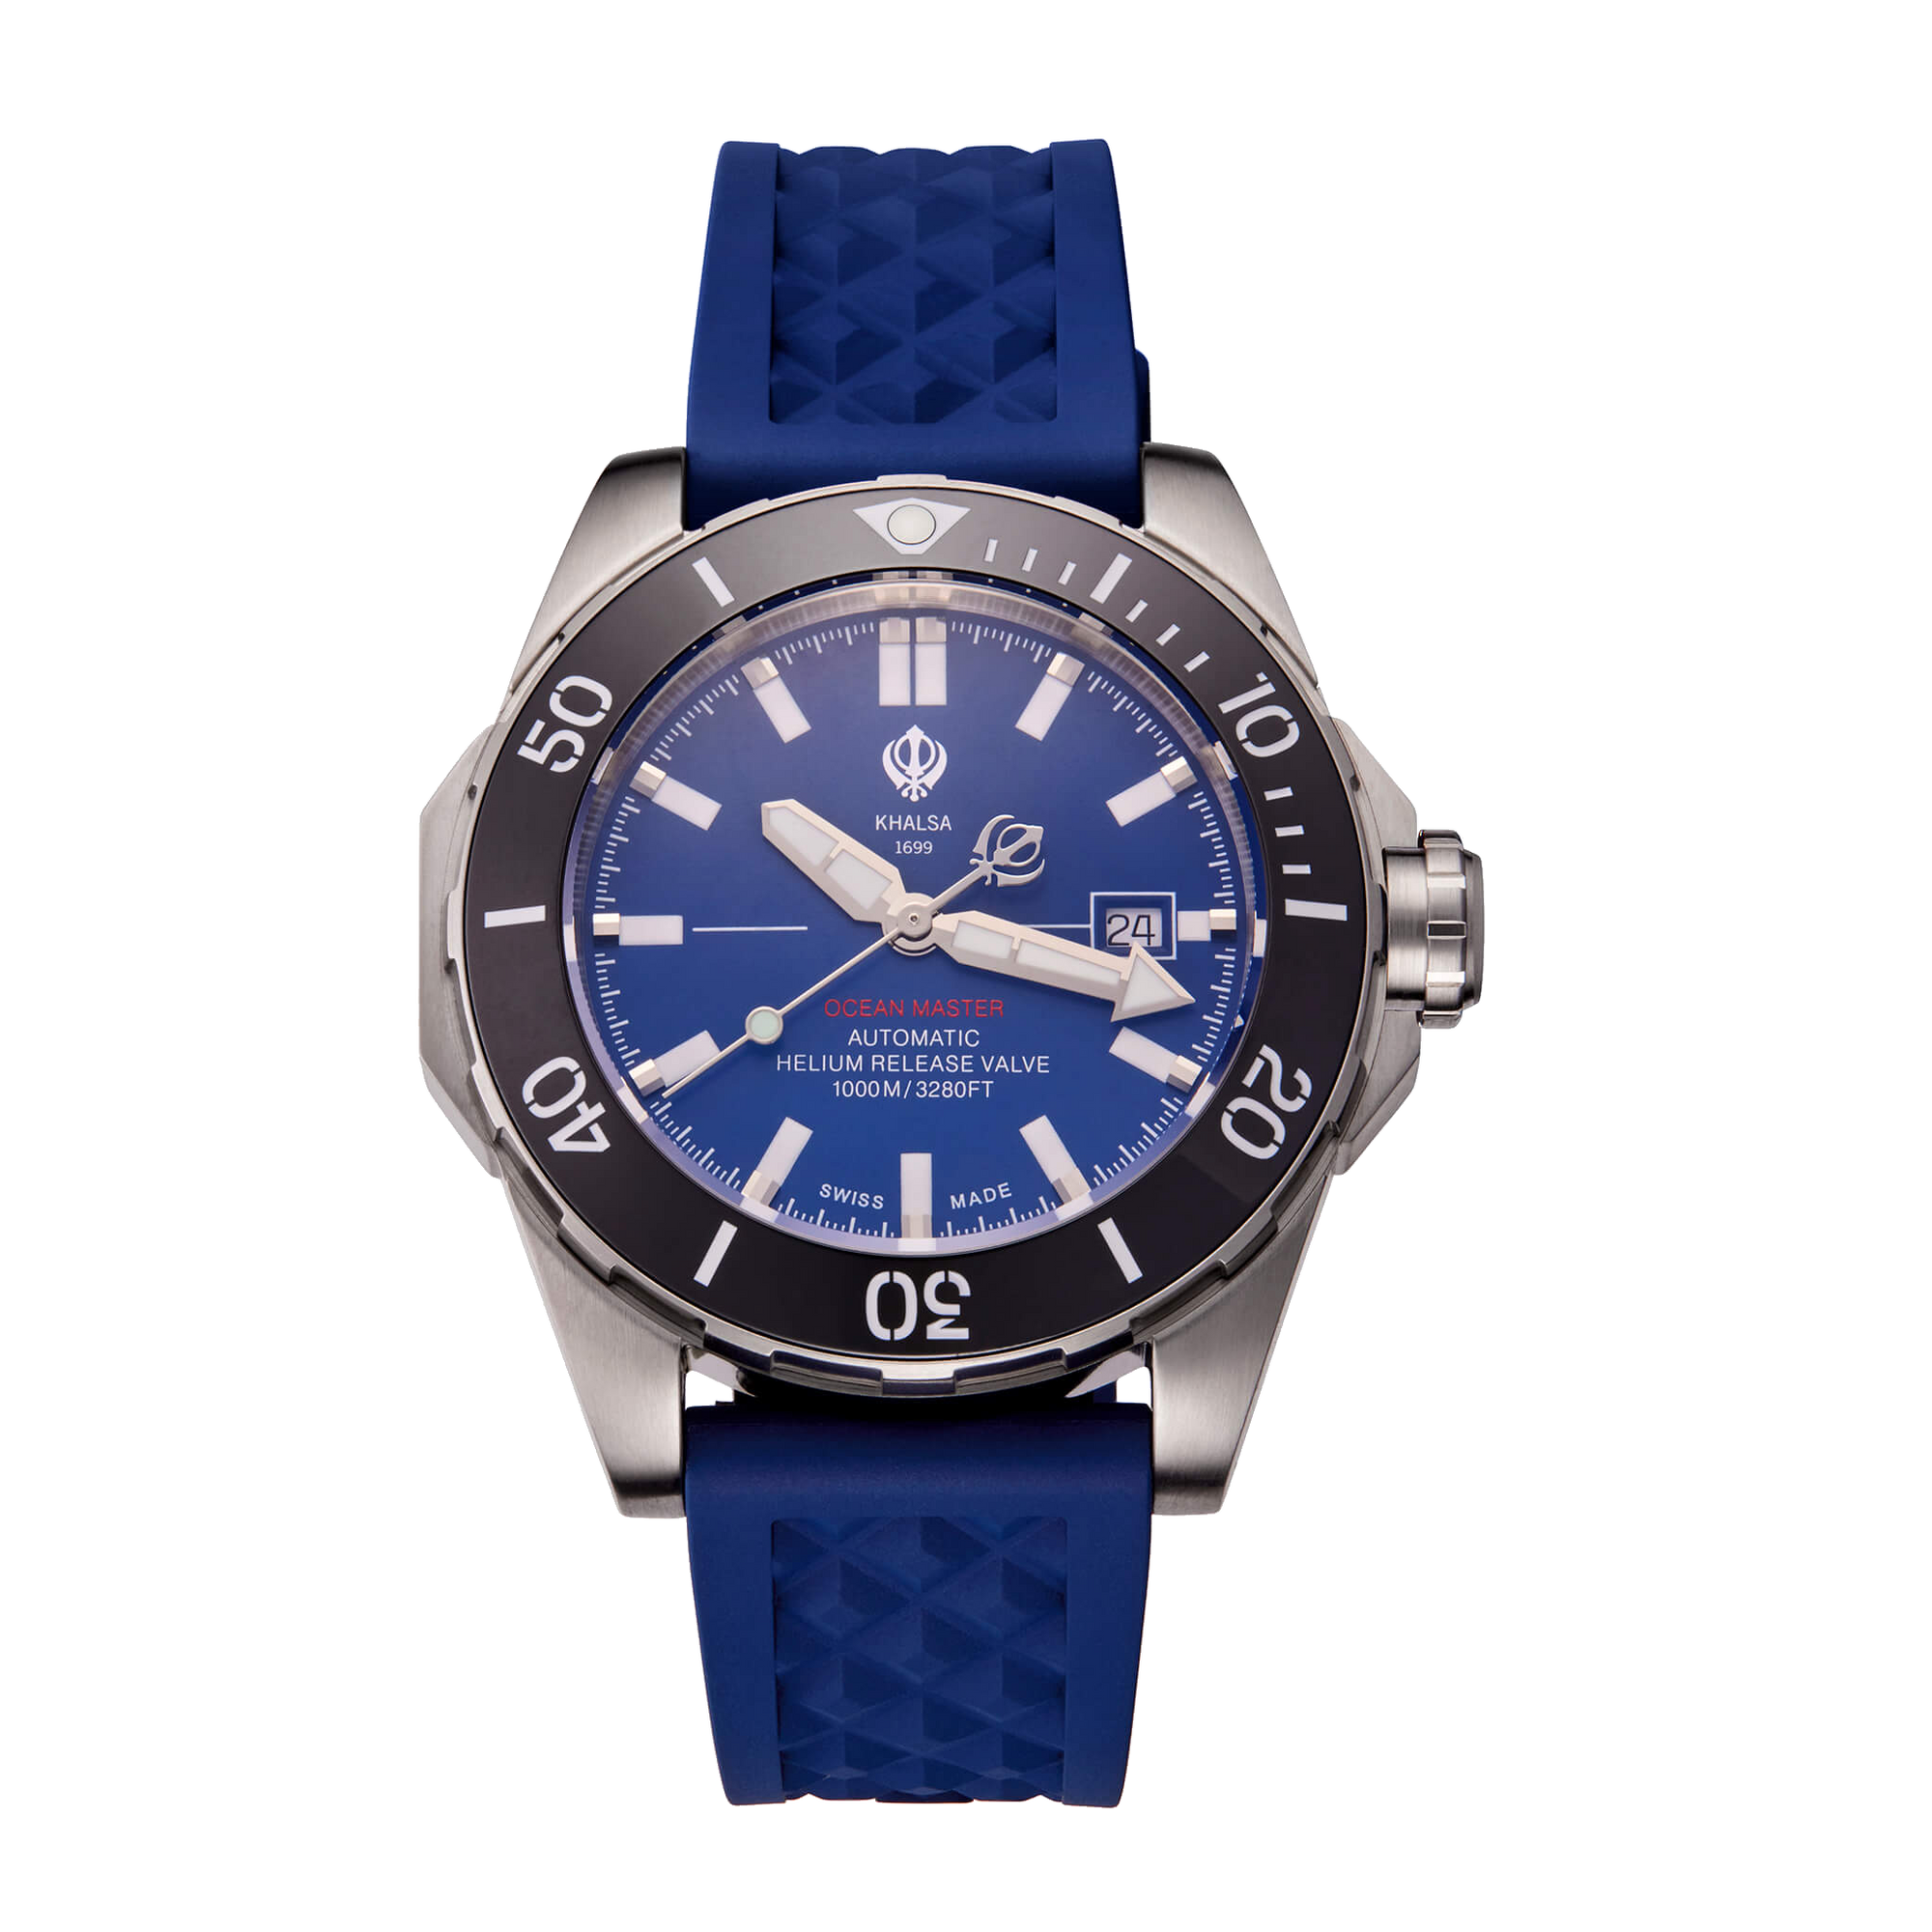 House of Khalsa Ocean Master Azure Blue Luxury Sikh Swiss Dive Watch for Men with Khanda Symbol and Blue Leather Strap - Perfect Gift